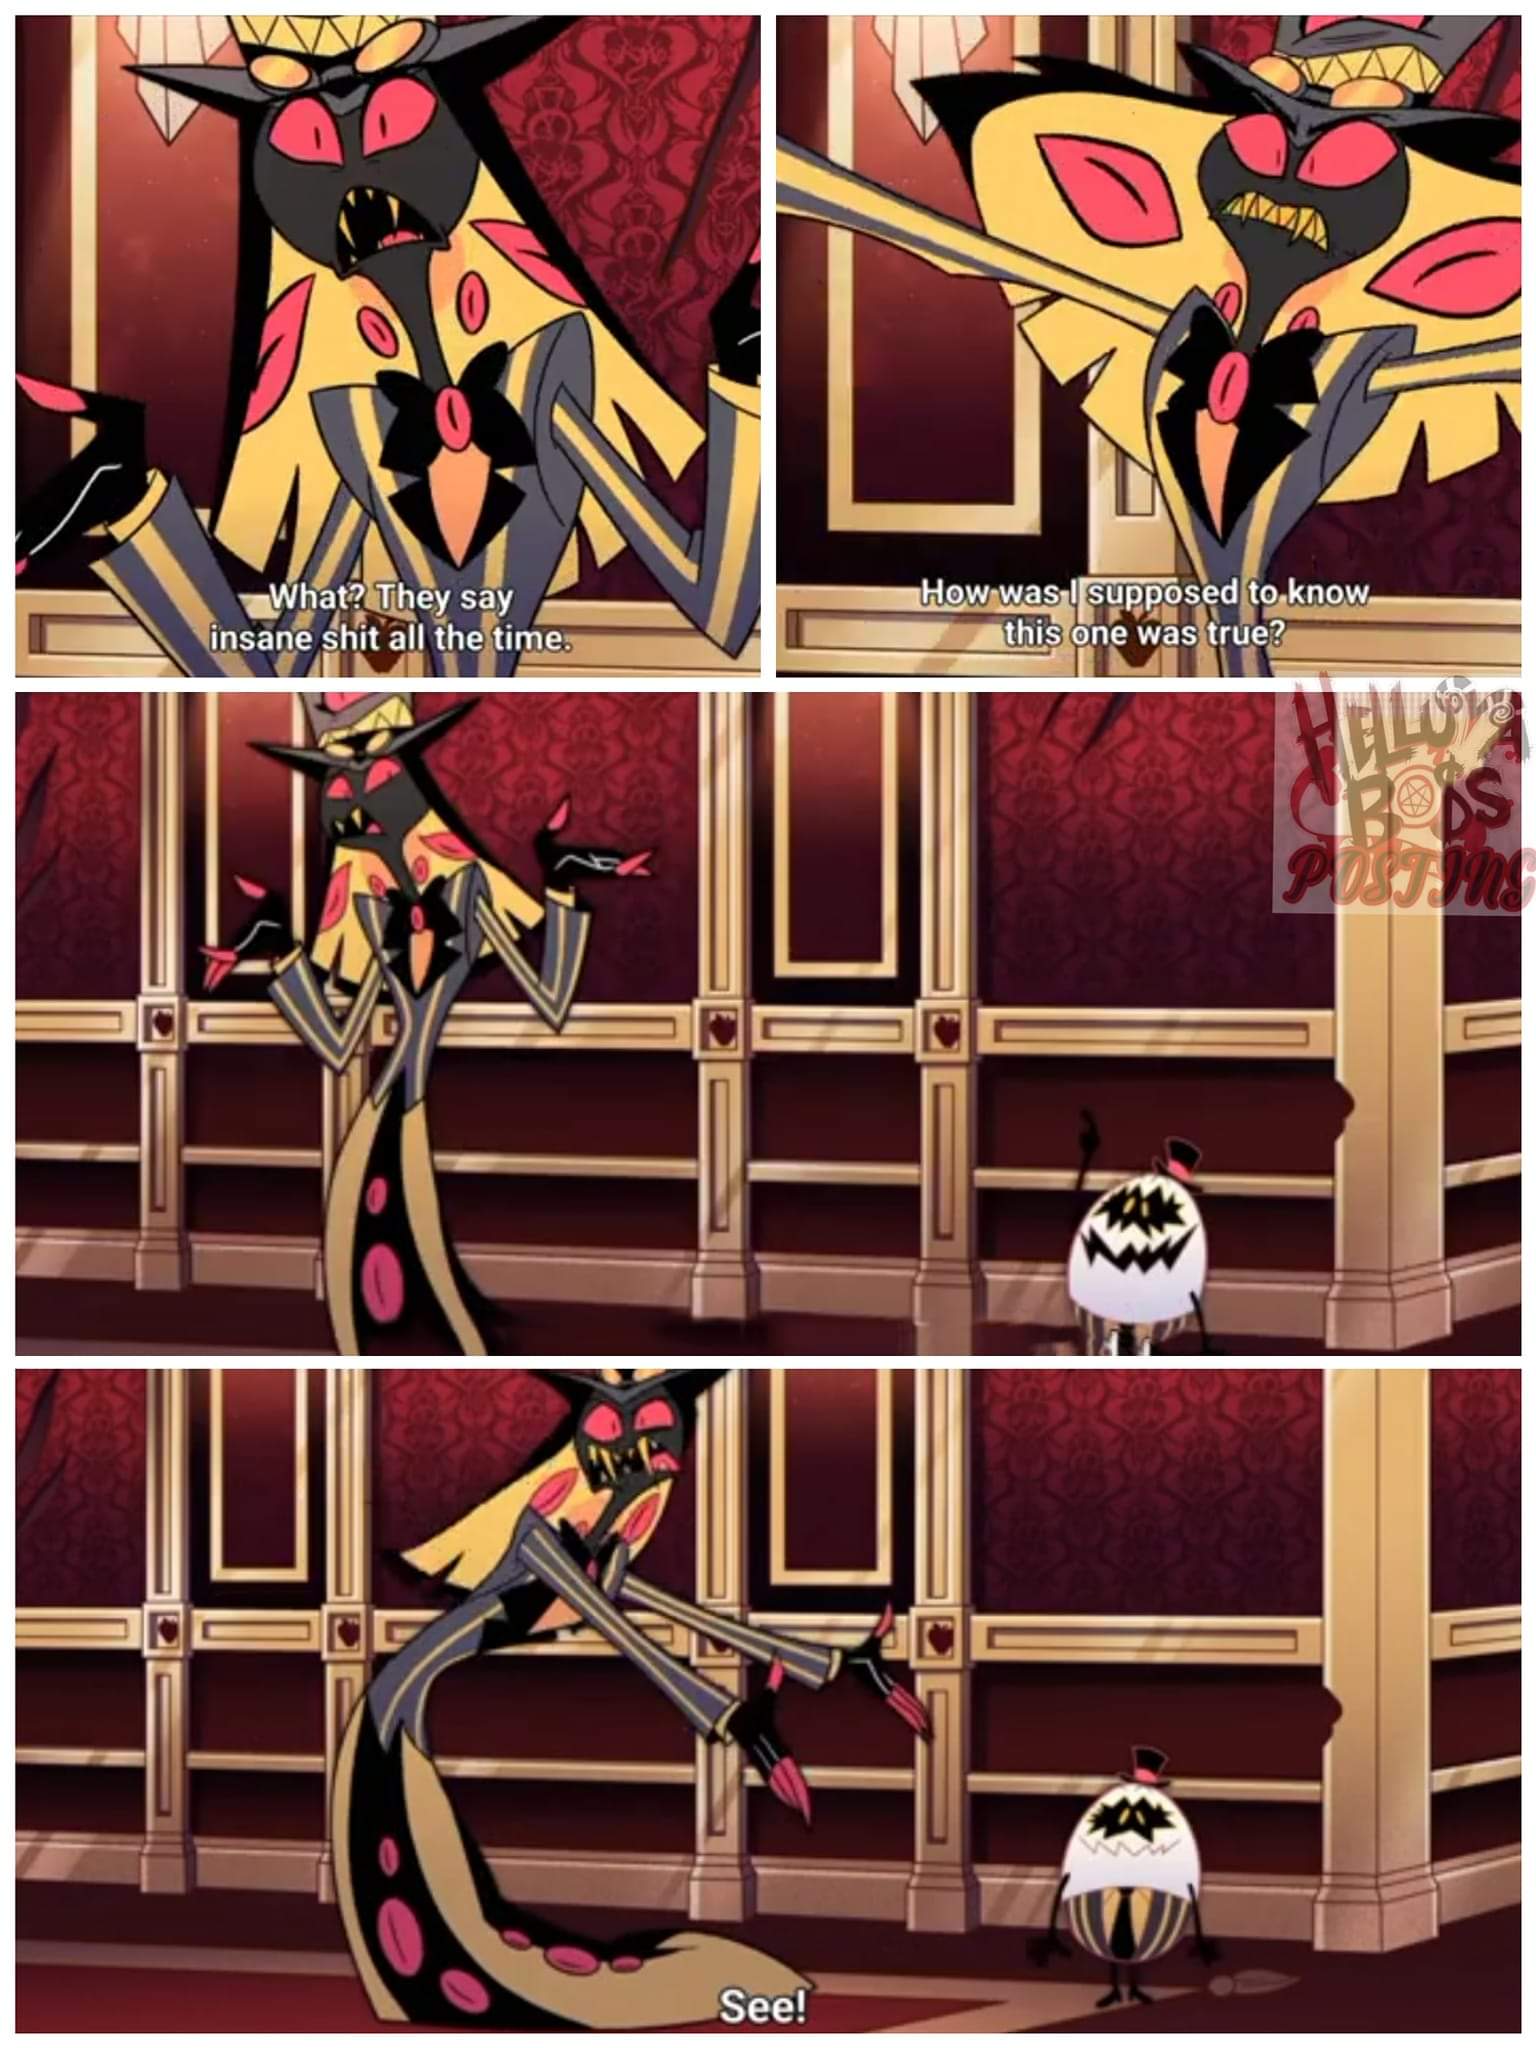 High Quality Sir Pentious They Say Insane Shit All the Time Blank Meme Template